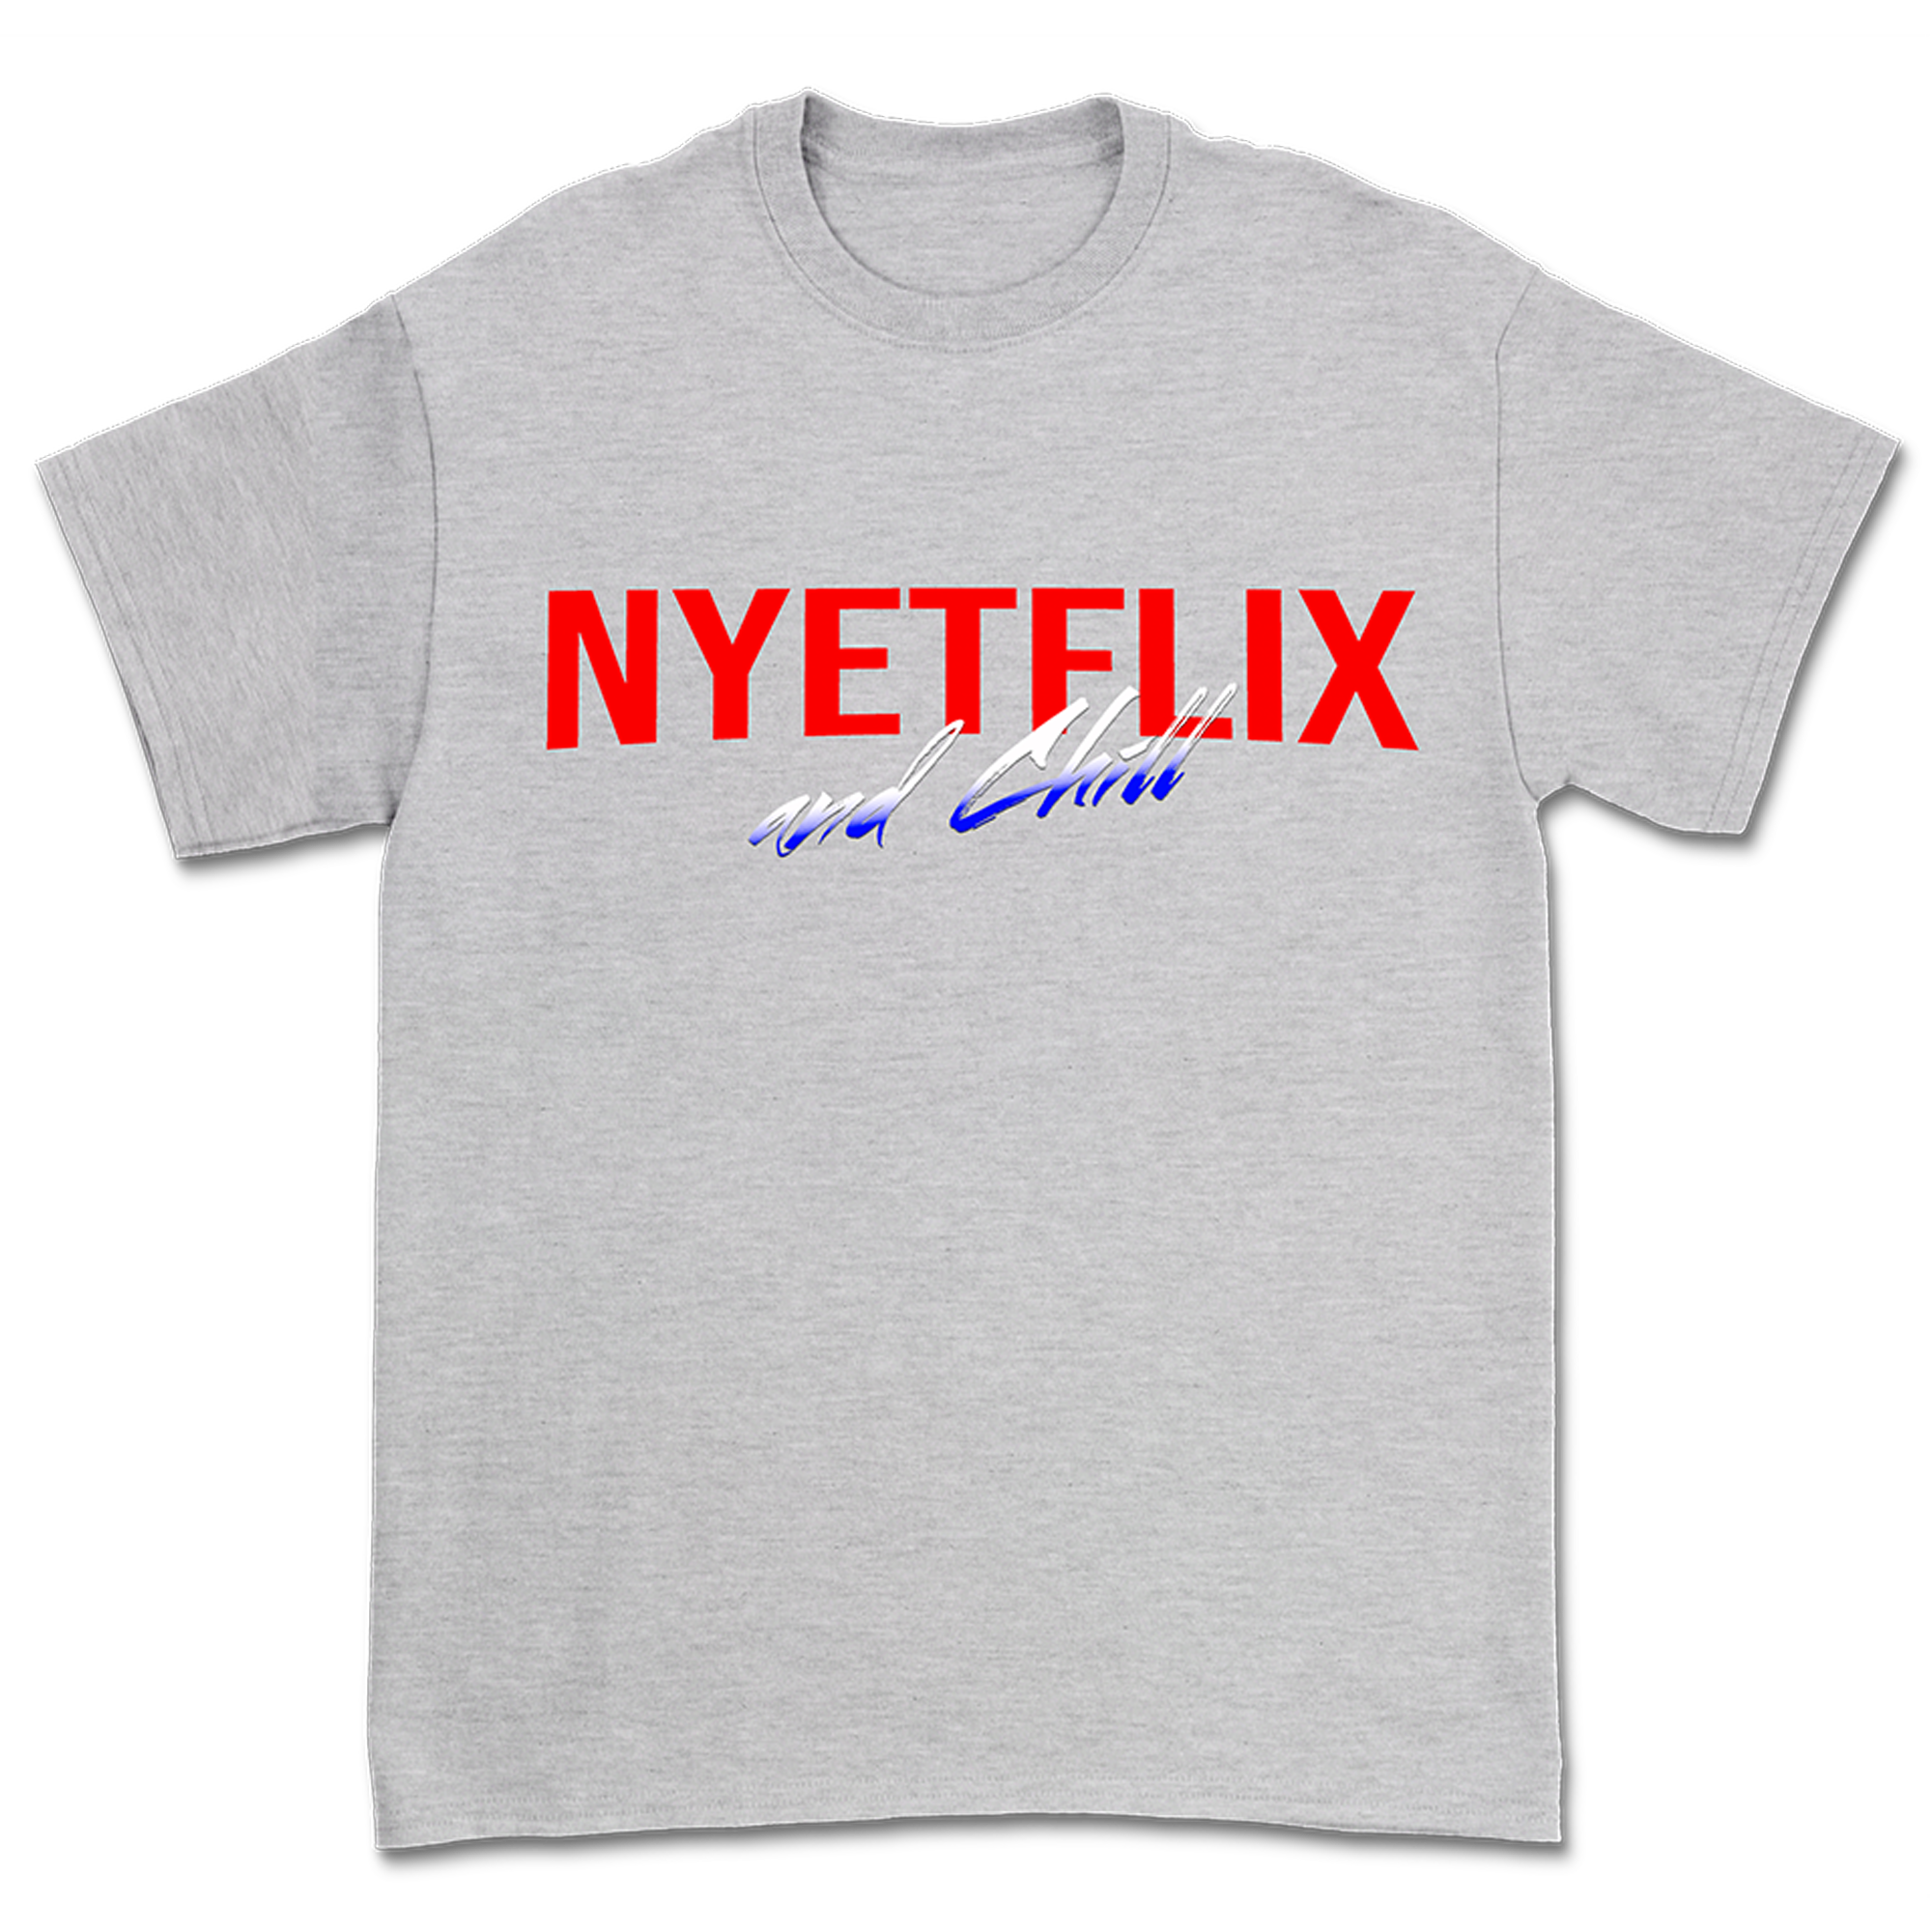 Nuclear Power Trio - Nyteflix & Chill T-Shirt